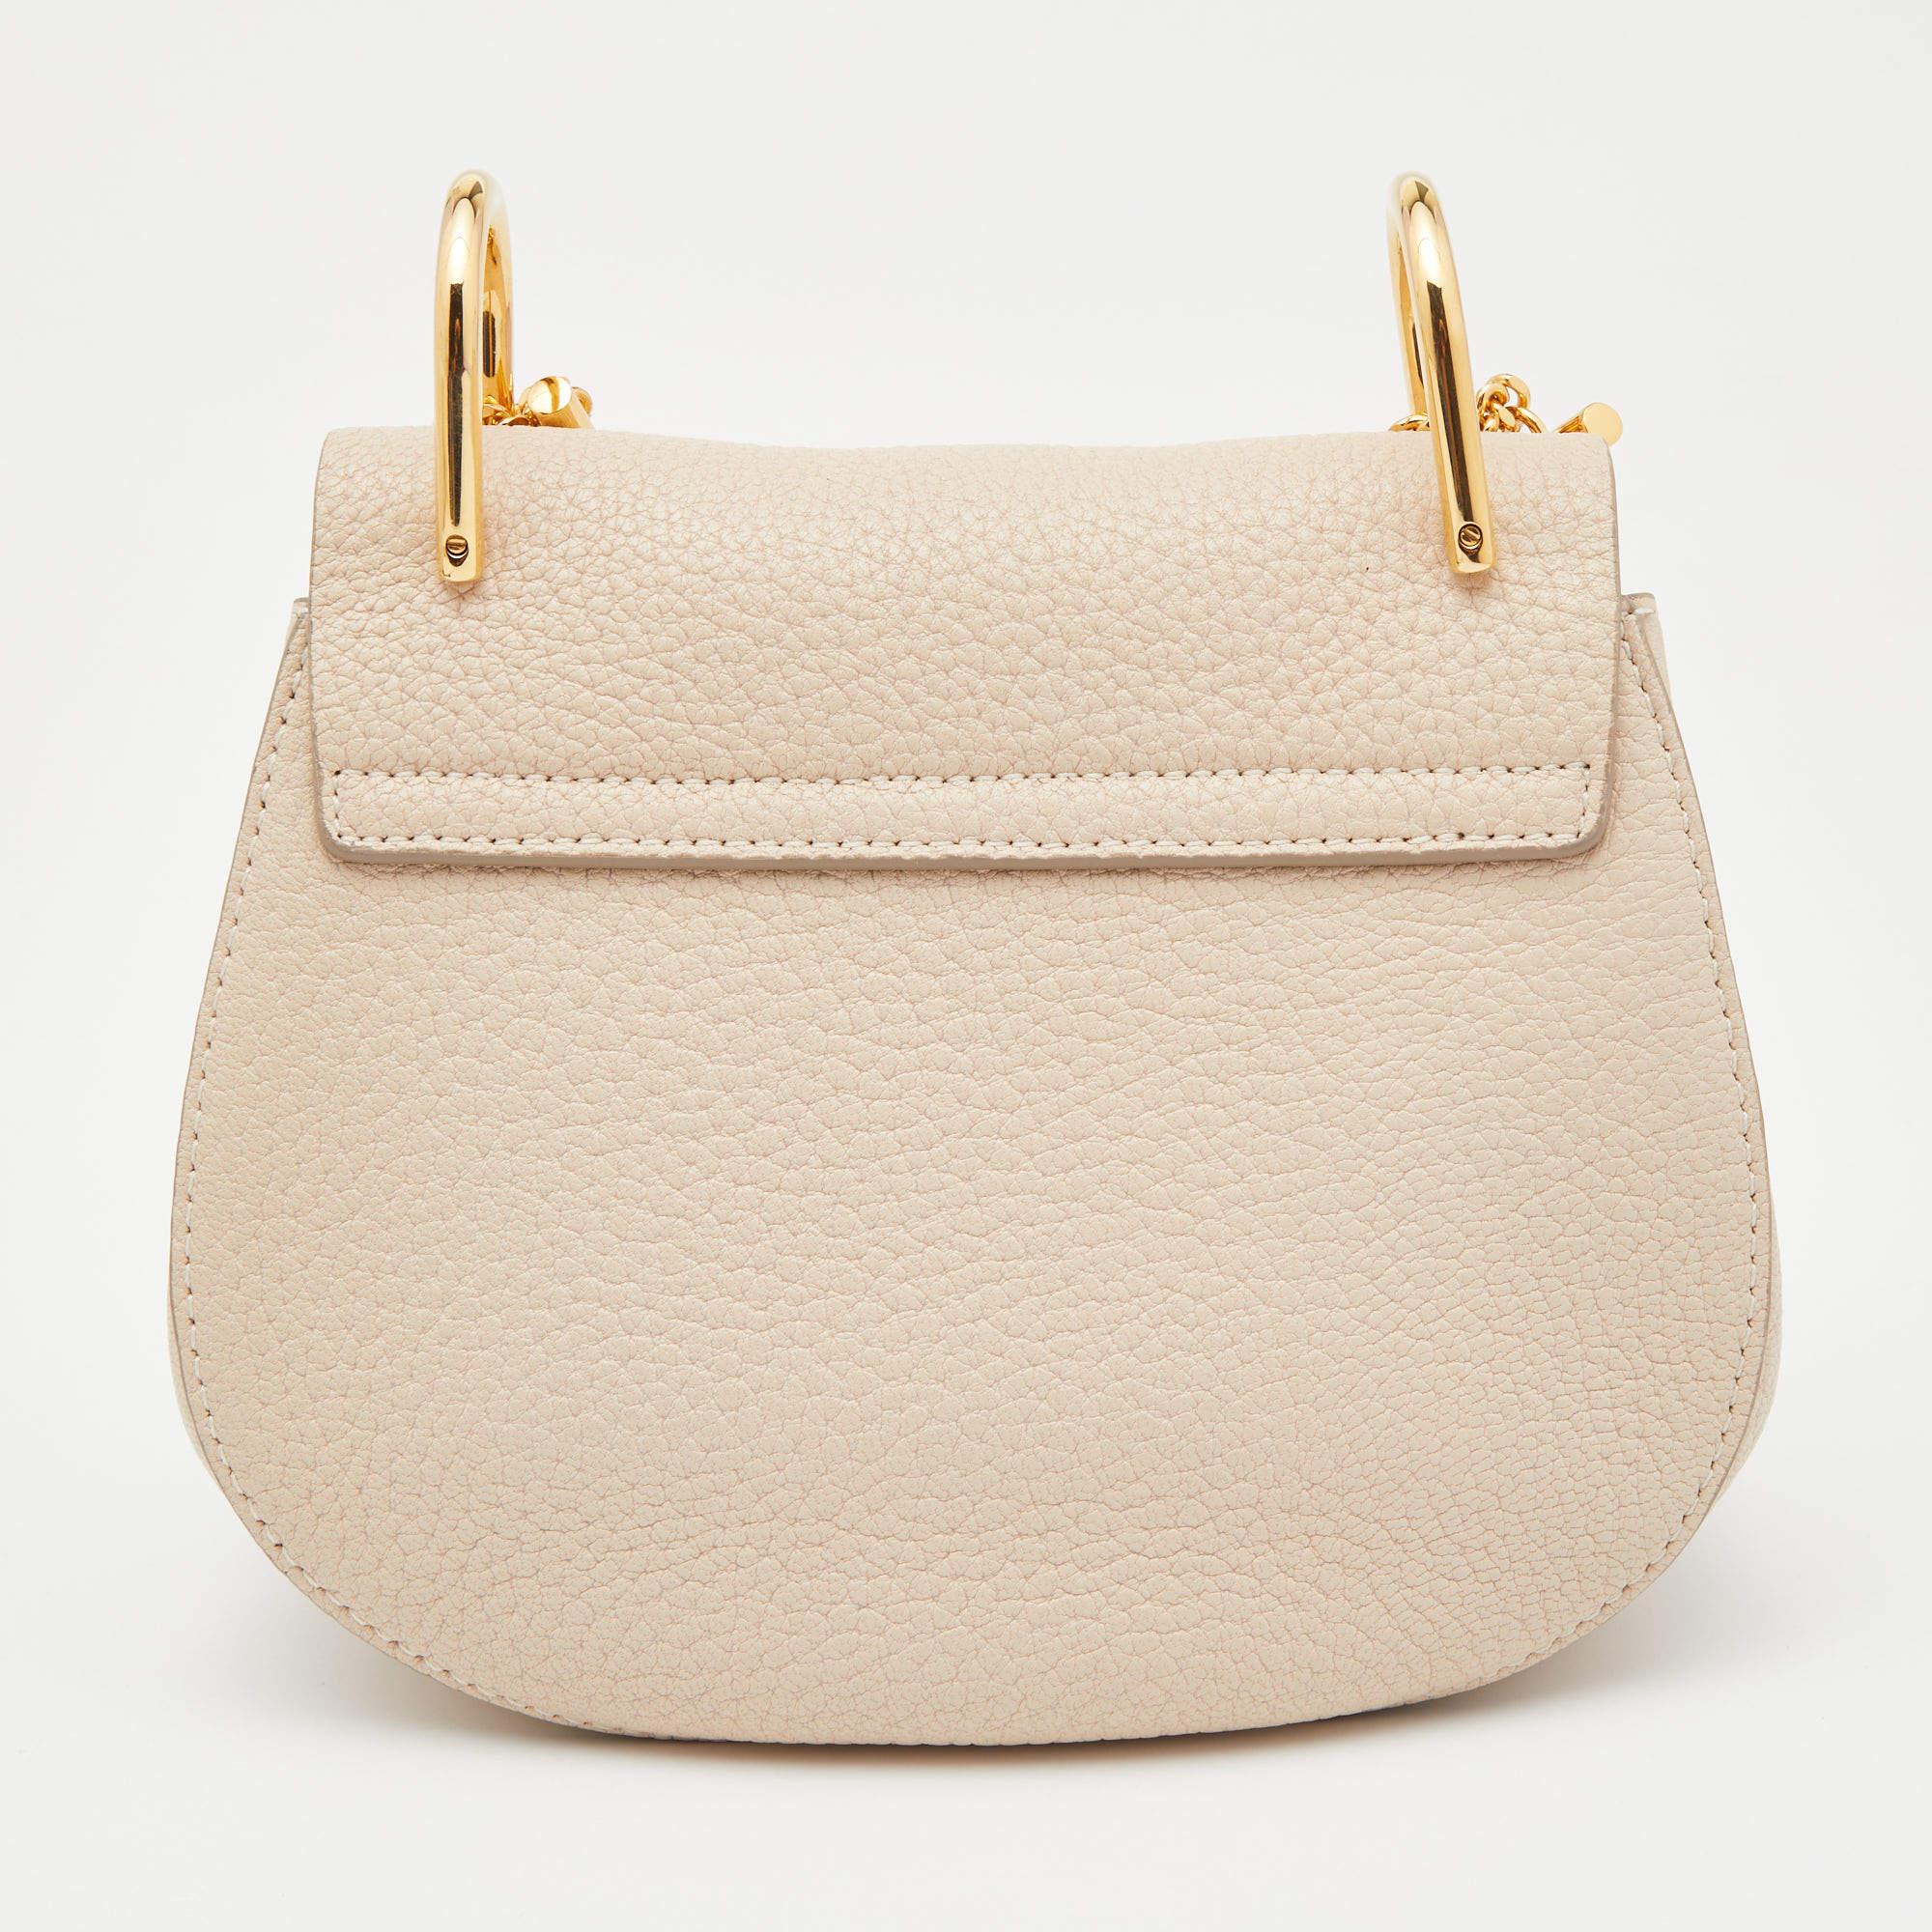 With its classic appeal and artistic design, this Chloe bag will win your heart at first sight. The gold-tone accents and luxurious elements of this beige creation make it a standout piece in your closet. Created from leather, it features a chain